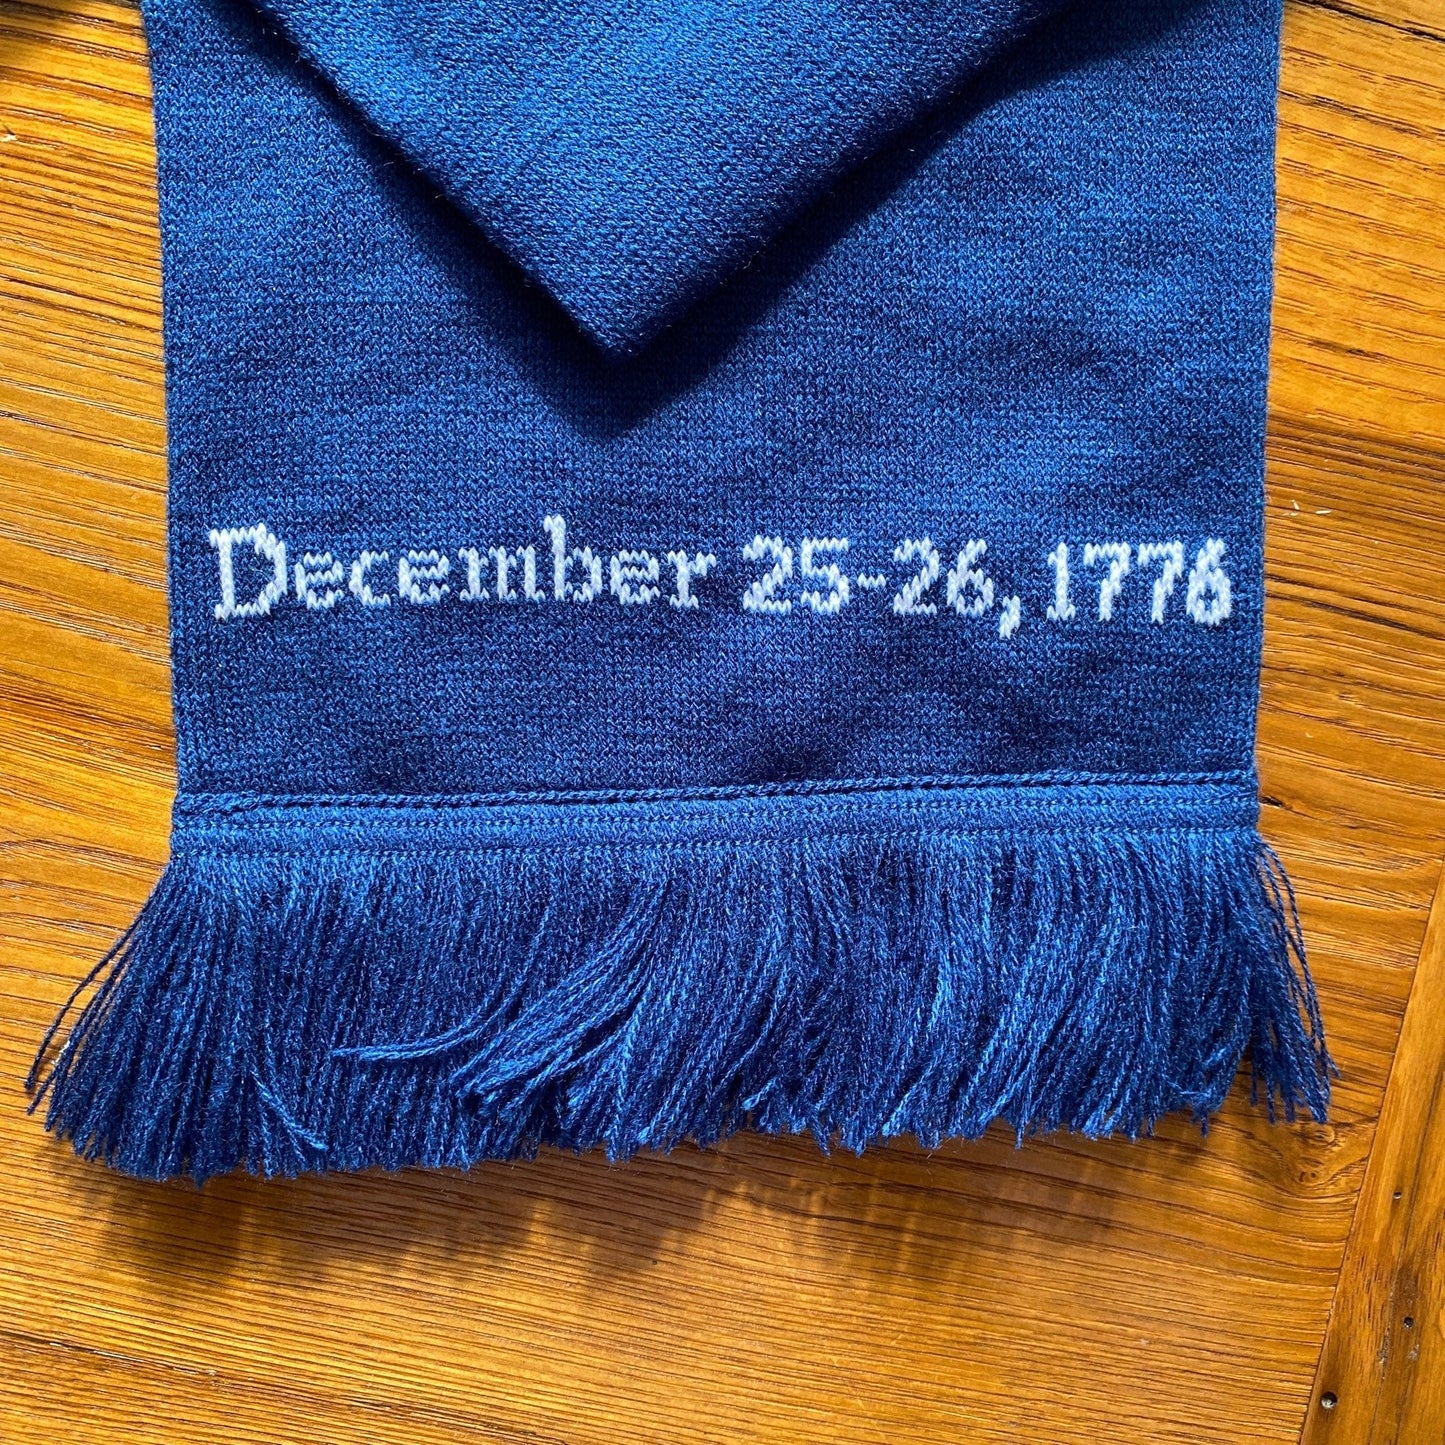 Close-up Date Dec 25-26, 1776 George Washington Signature "Victory or Death" woven scarf from the history list store